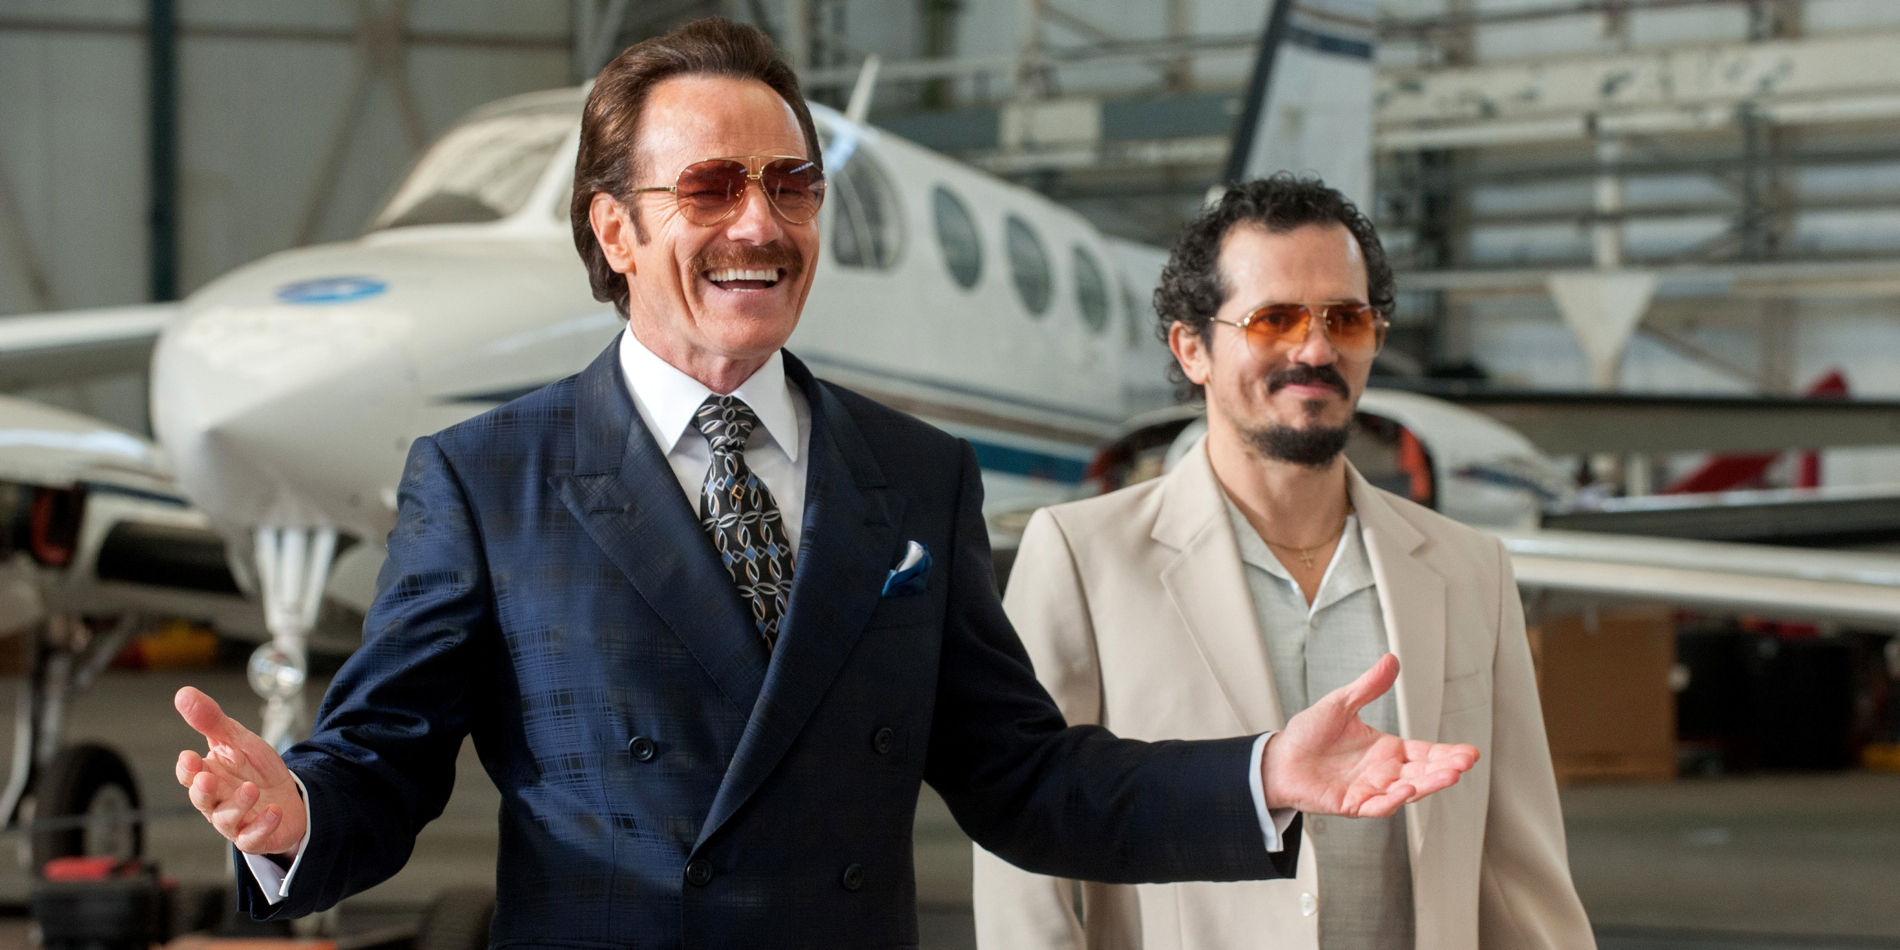 Bryan-Cranston-in-The-Infiltrator-movie review